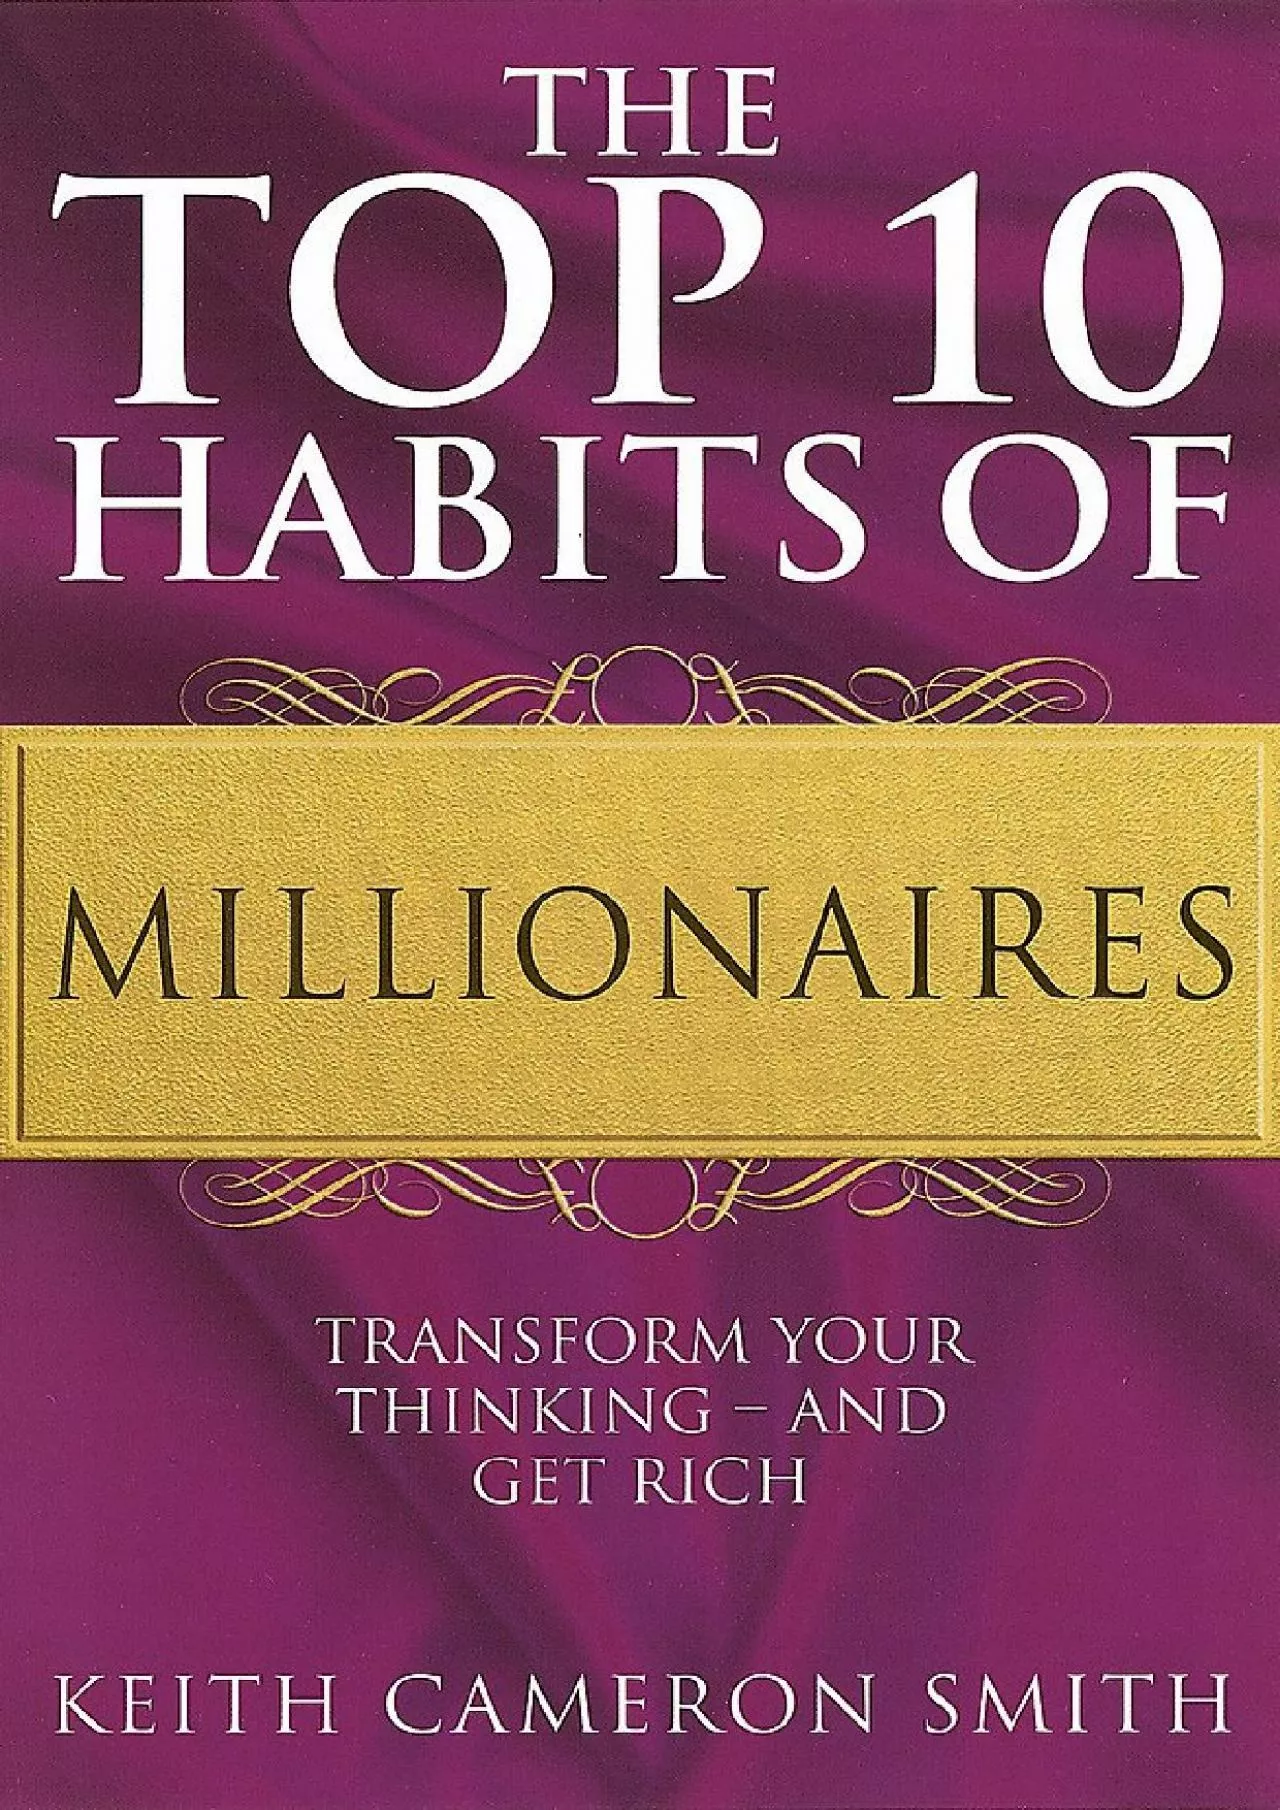 (EBOOK)-The Top 10 Habits Of Millionaires: Transform Your Thinking - and Get Rich